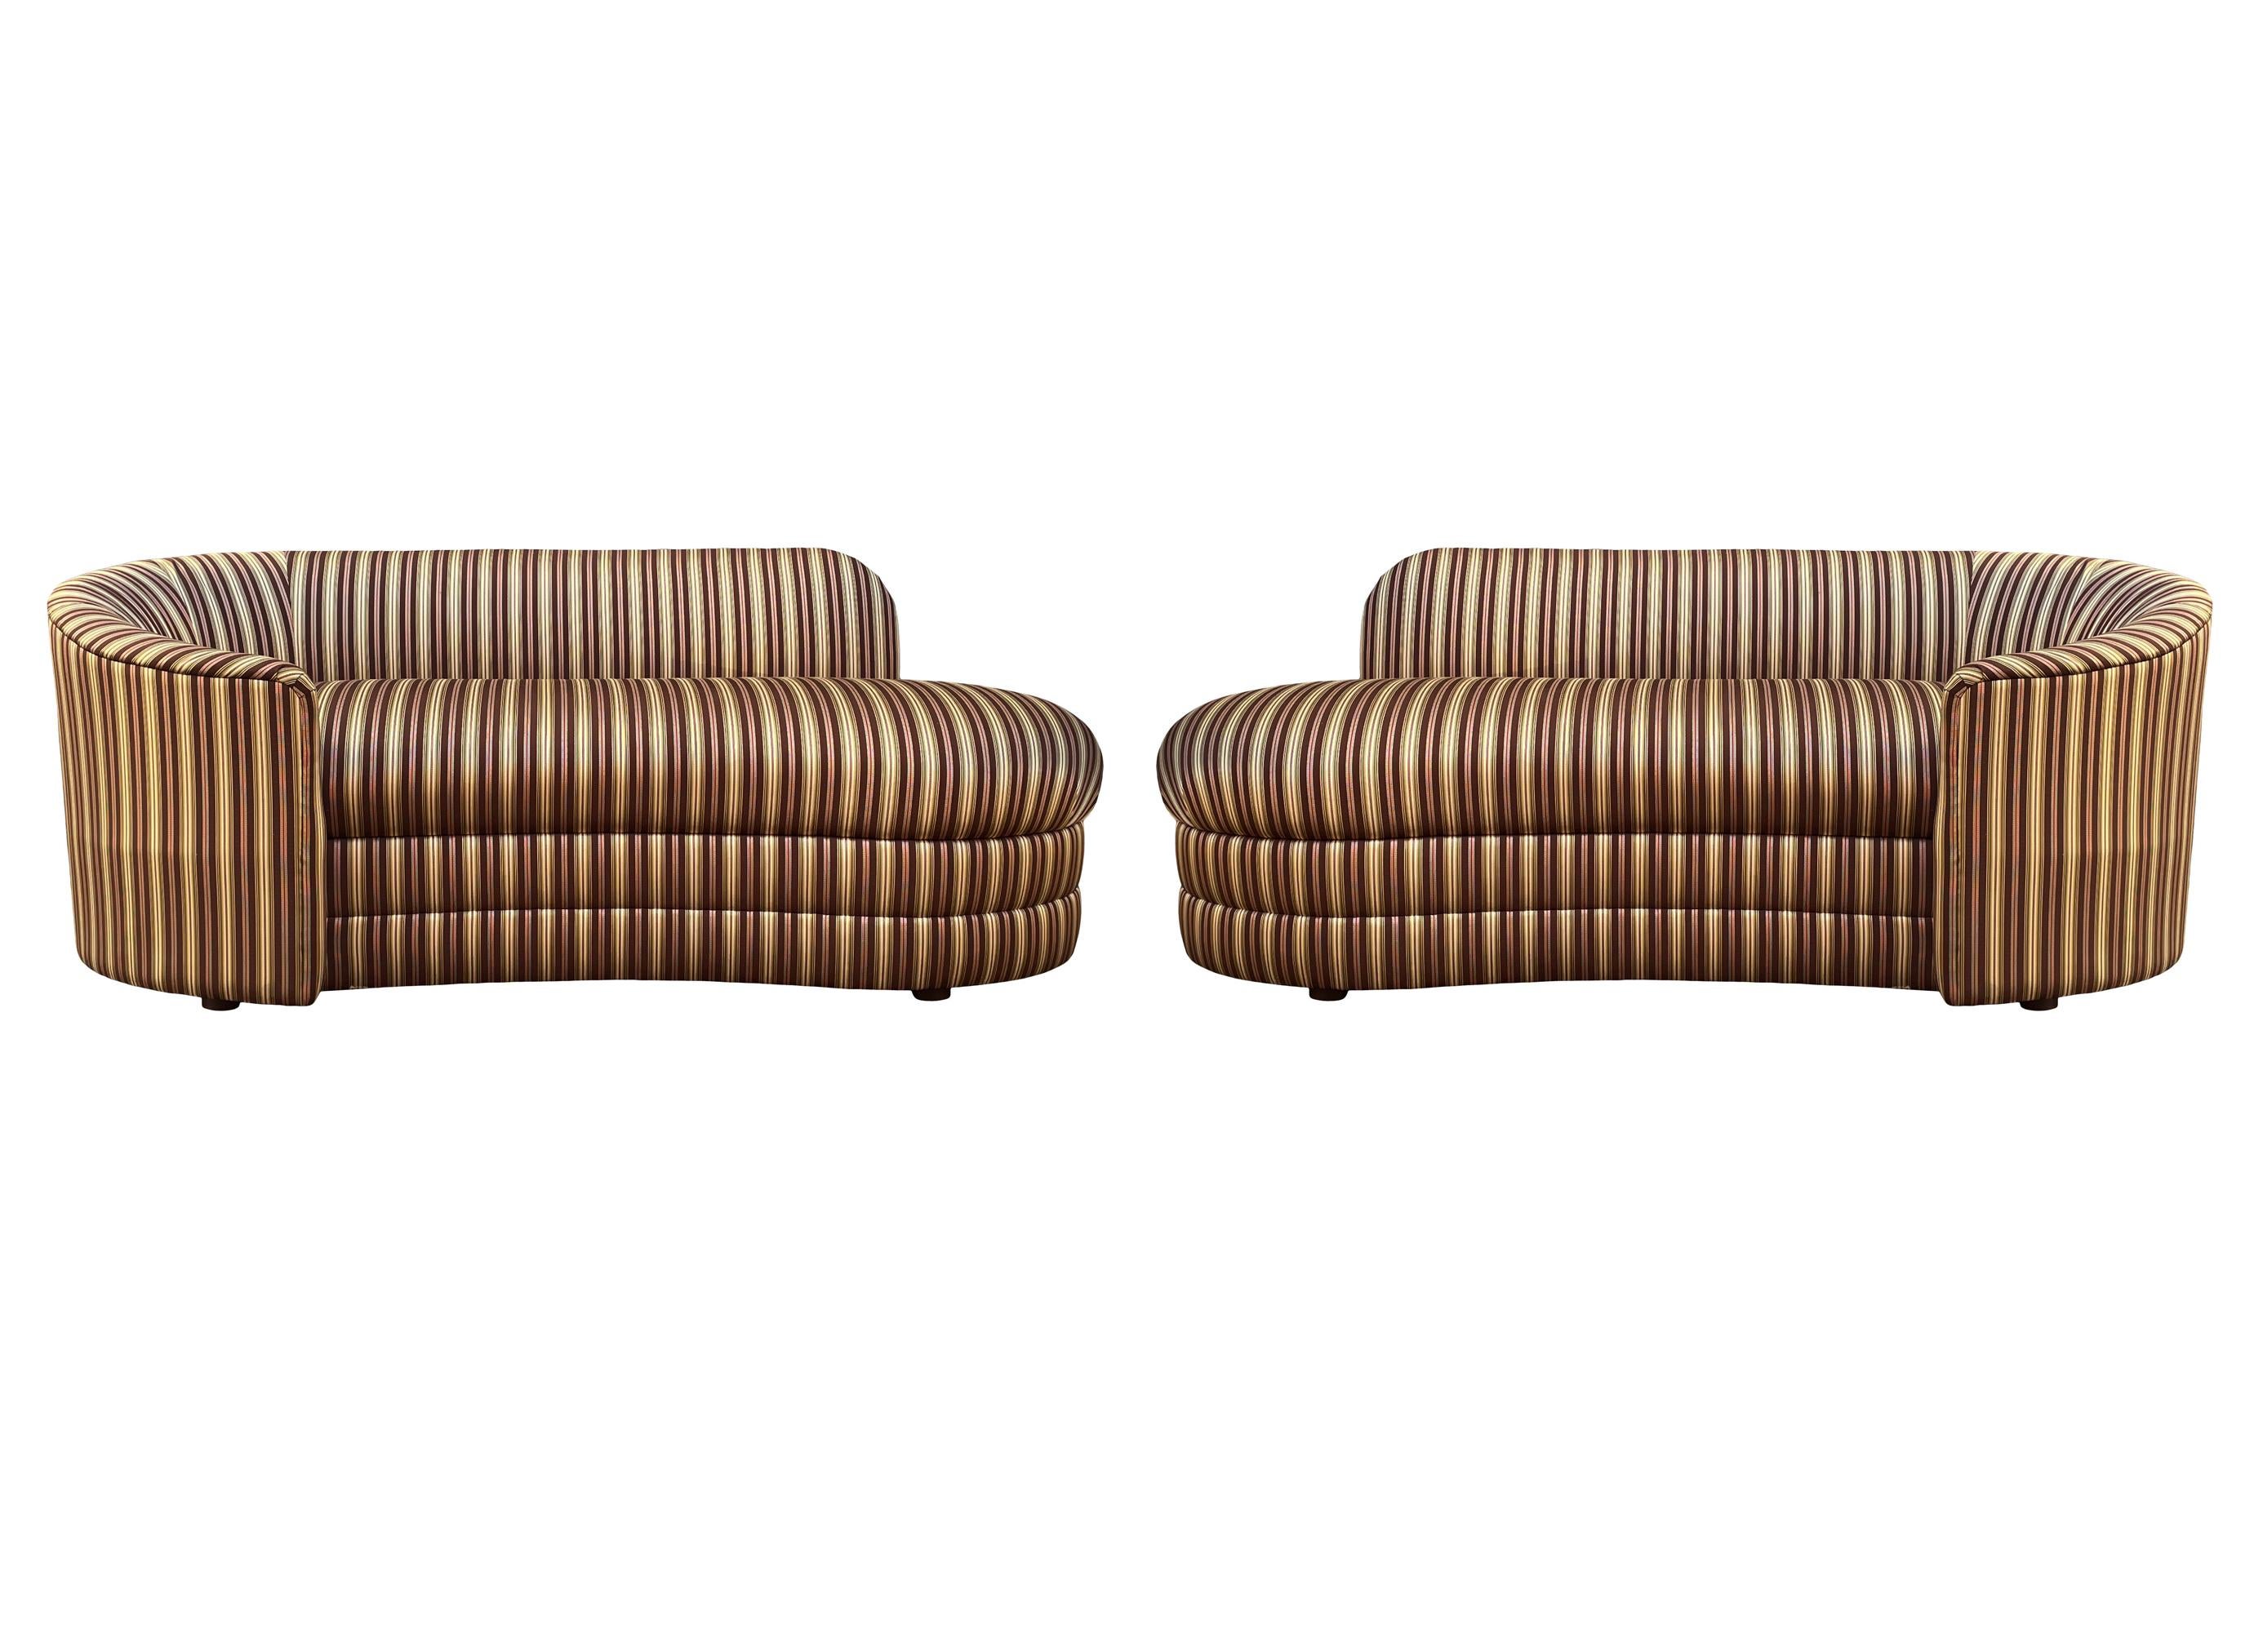 Pair of Hollywood Regency Opposing Curved Chaise Lounges, Sofas or Loveseats  For Sale 4